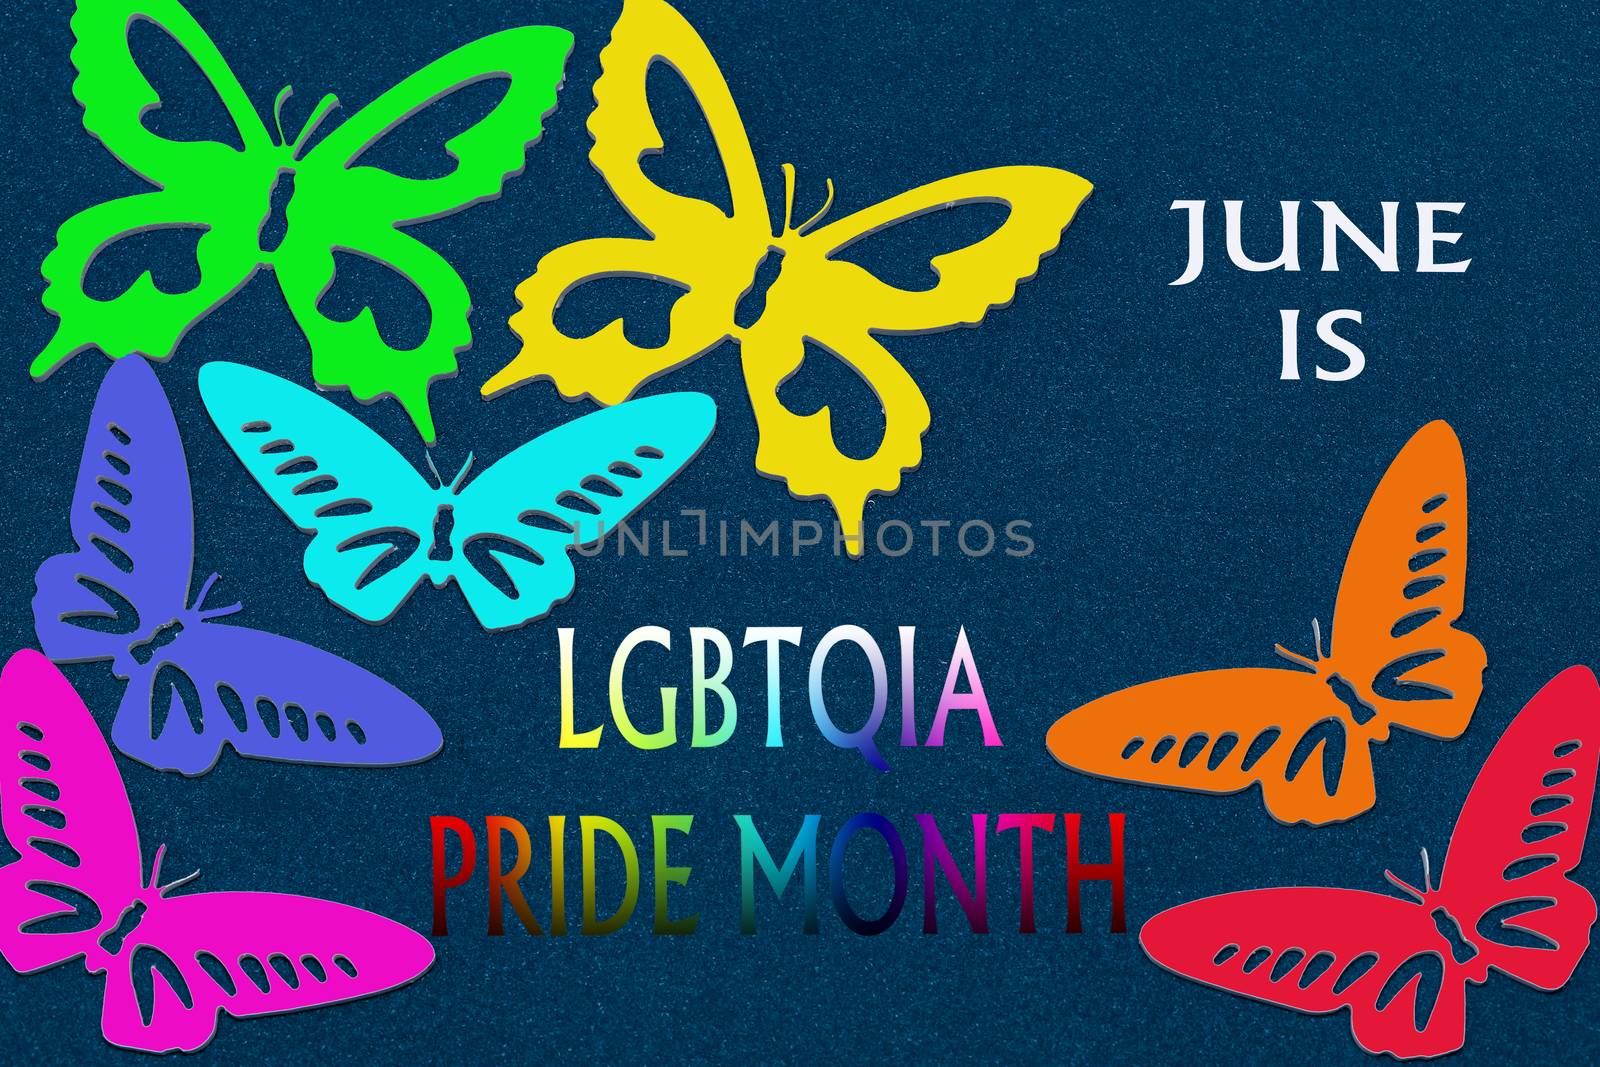 June is LGBT pride month. Greeting text and rainbow-colored butterflies on a blue background. by bonilook